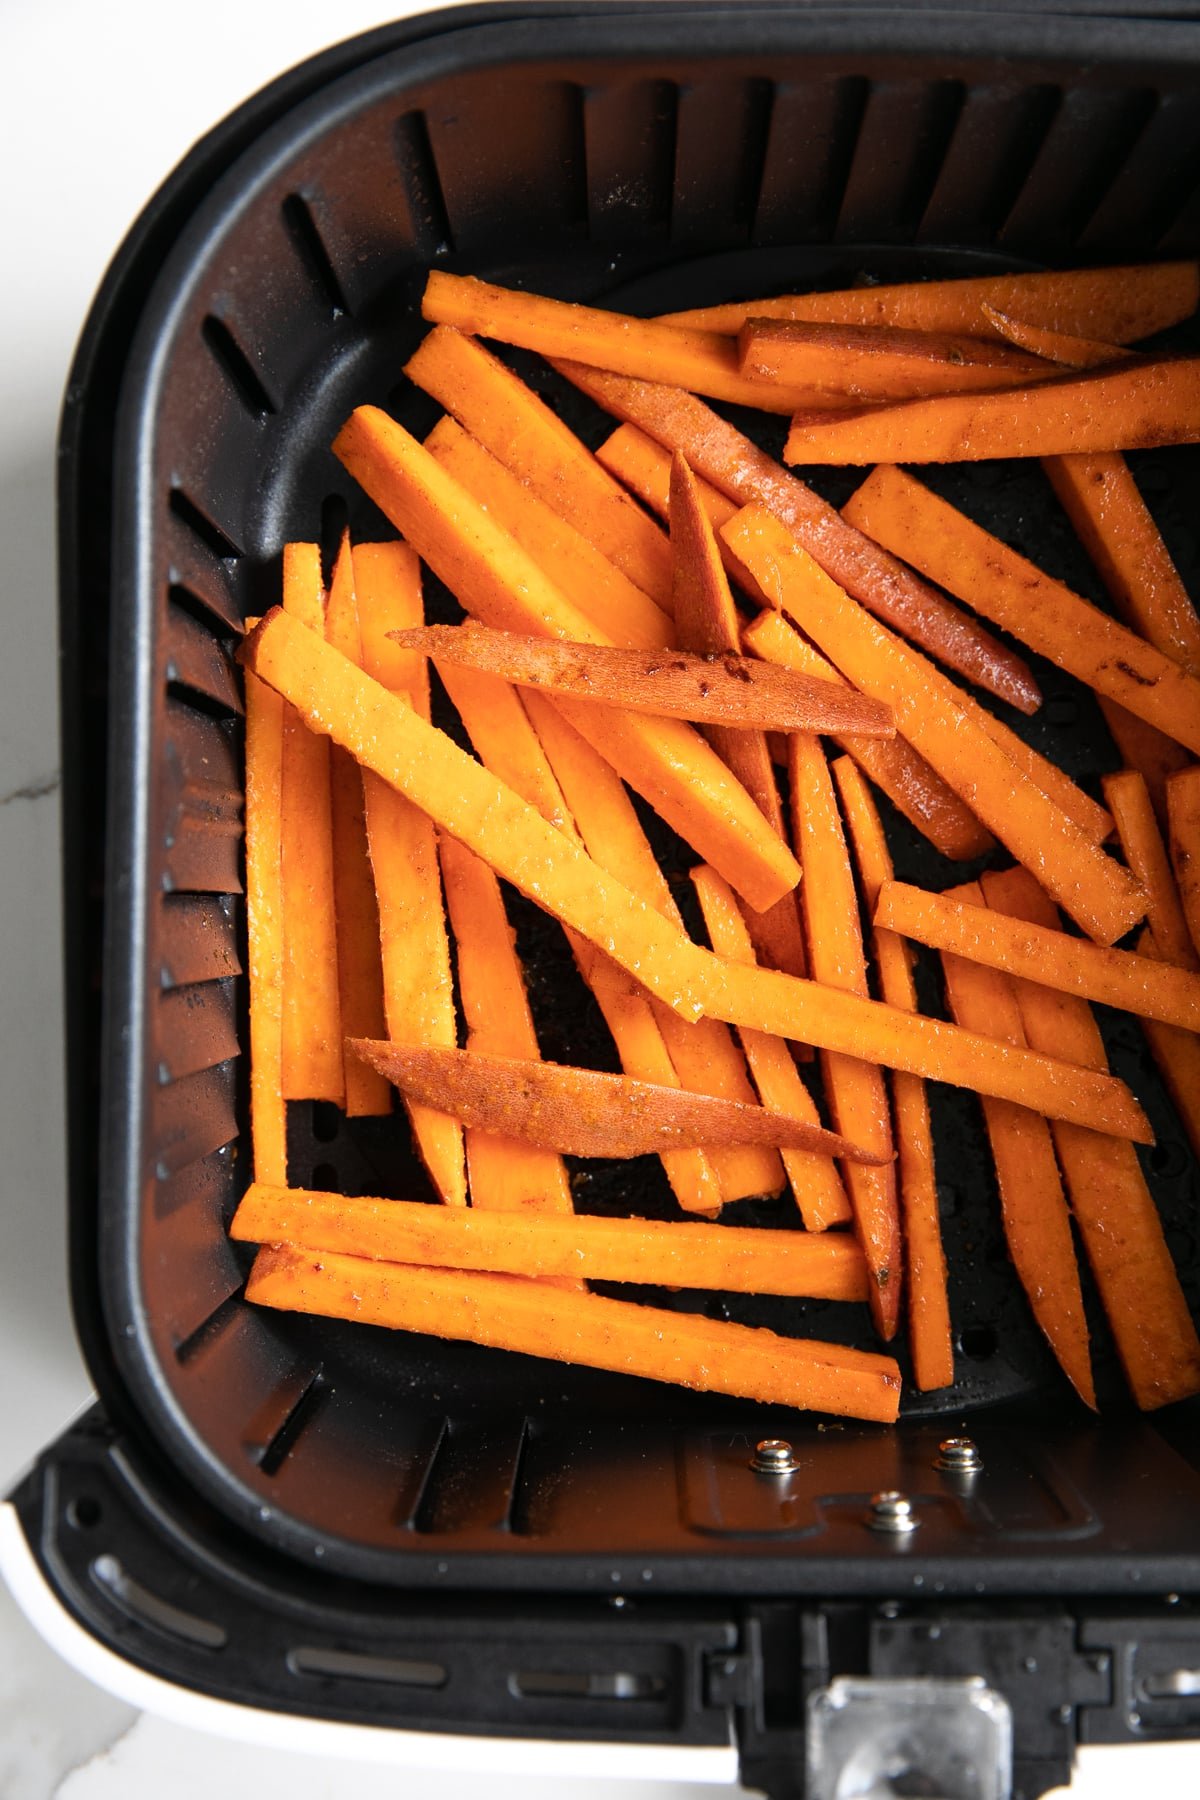 Overhead image looking into the basket of an air fryer filled with uncooked sweet potato fries.